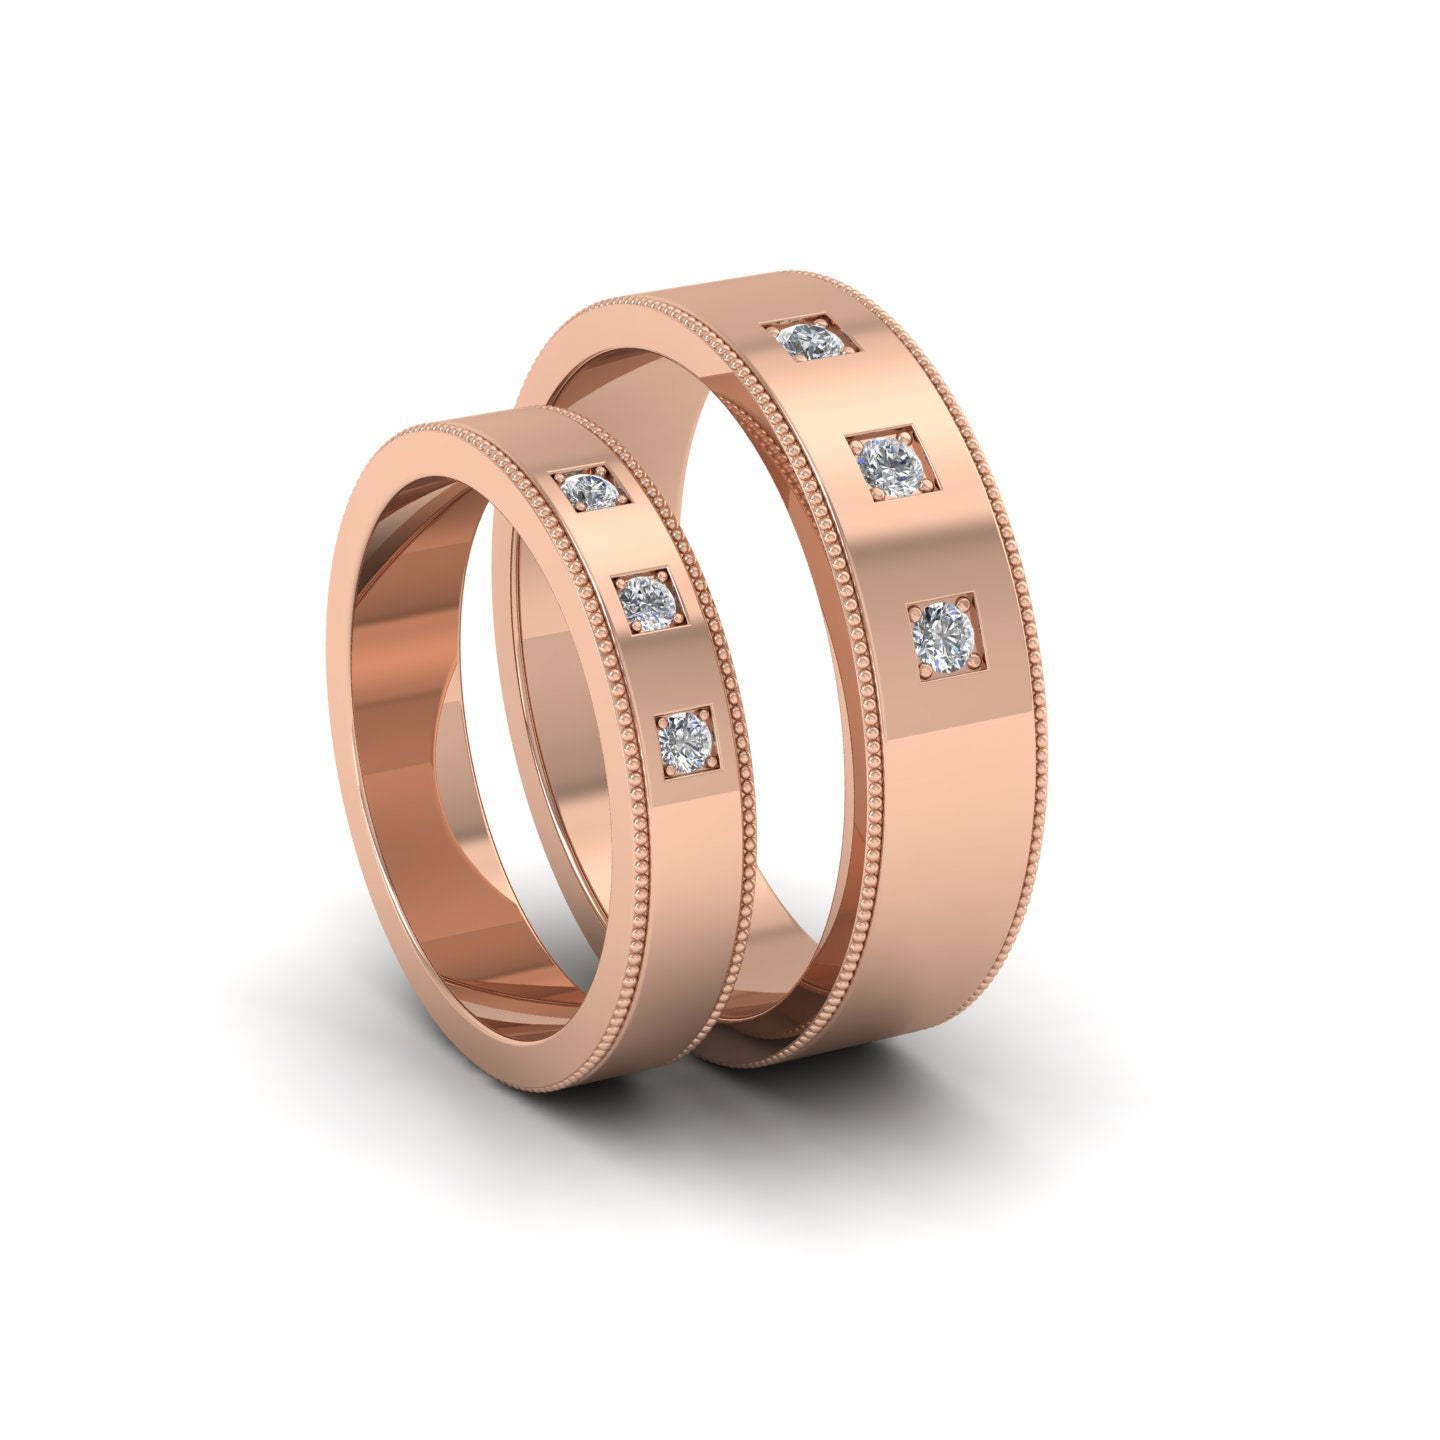 Three Diamonds With Square Setting 9ct Rose Gold 6mm Wedding Ring With Millgrain Edge